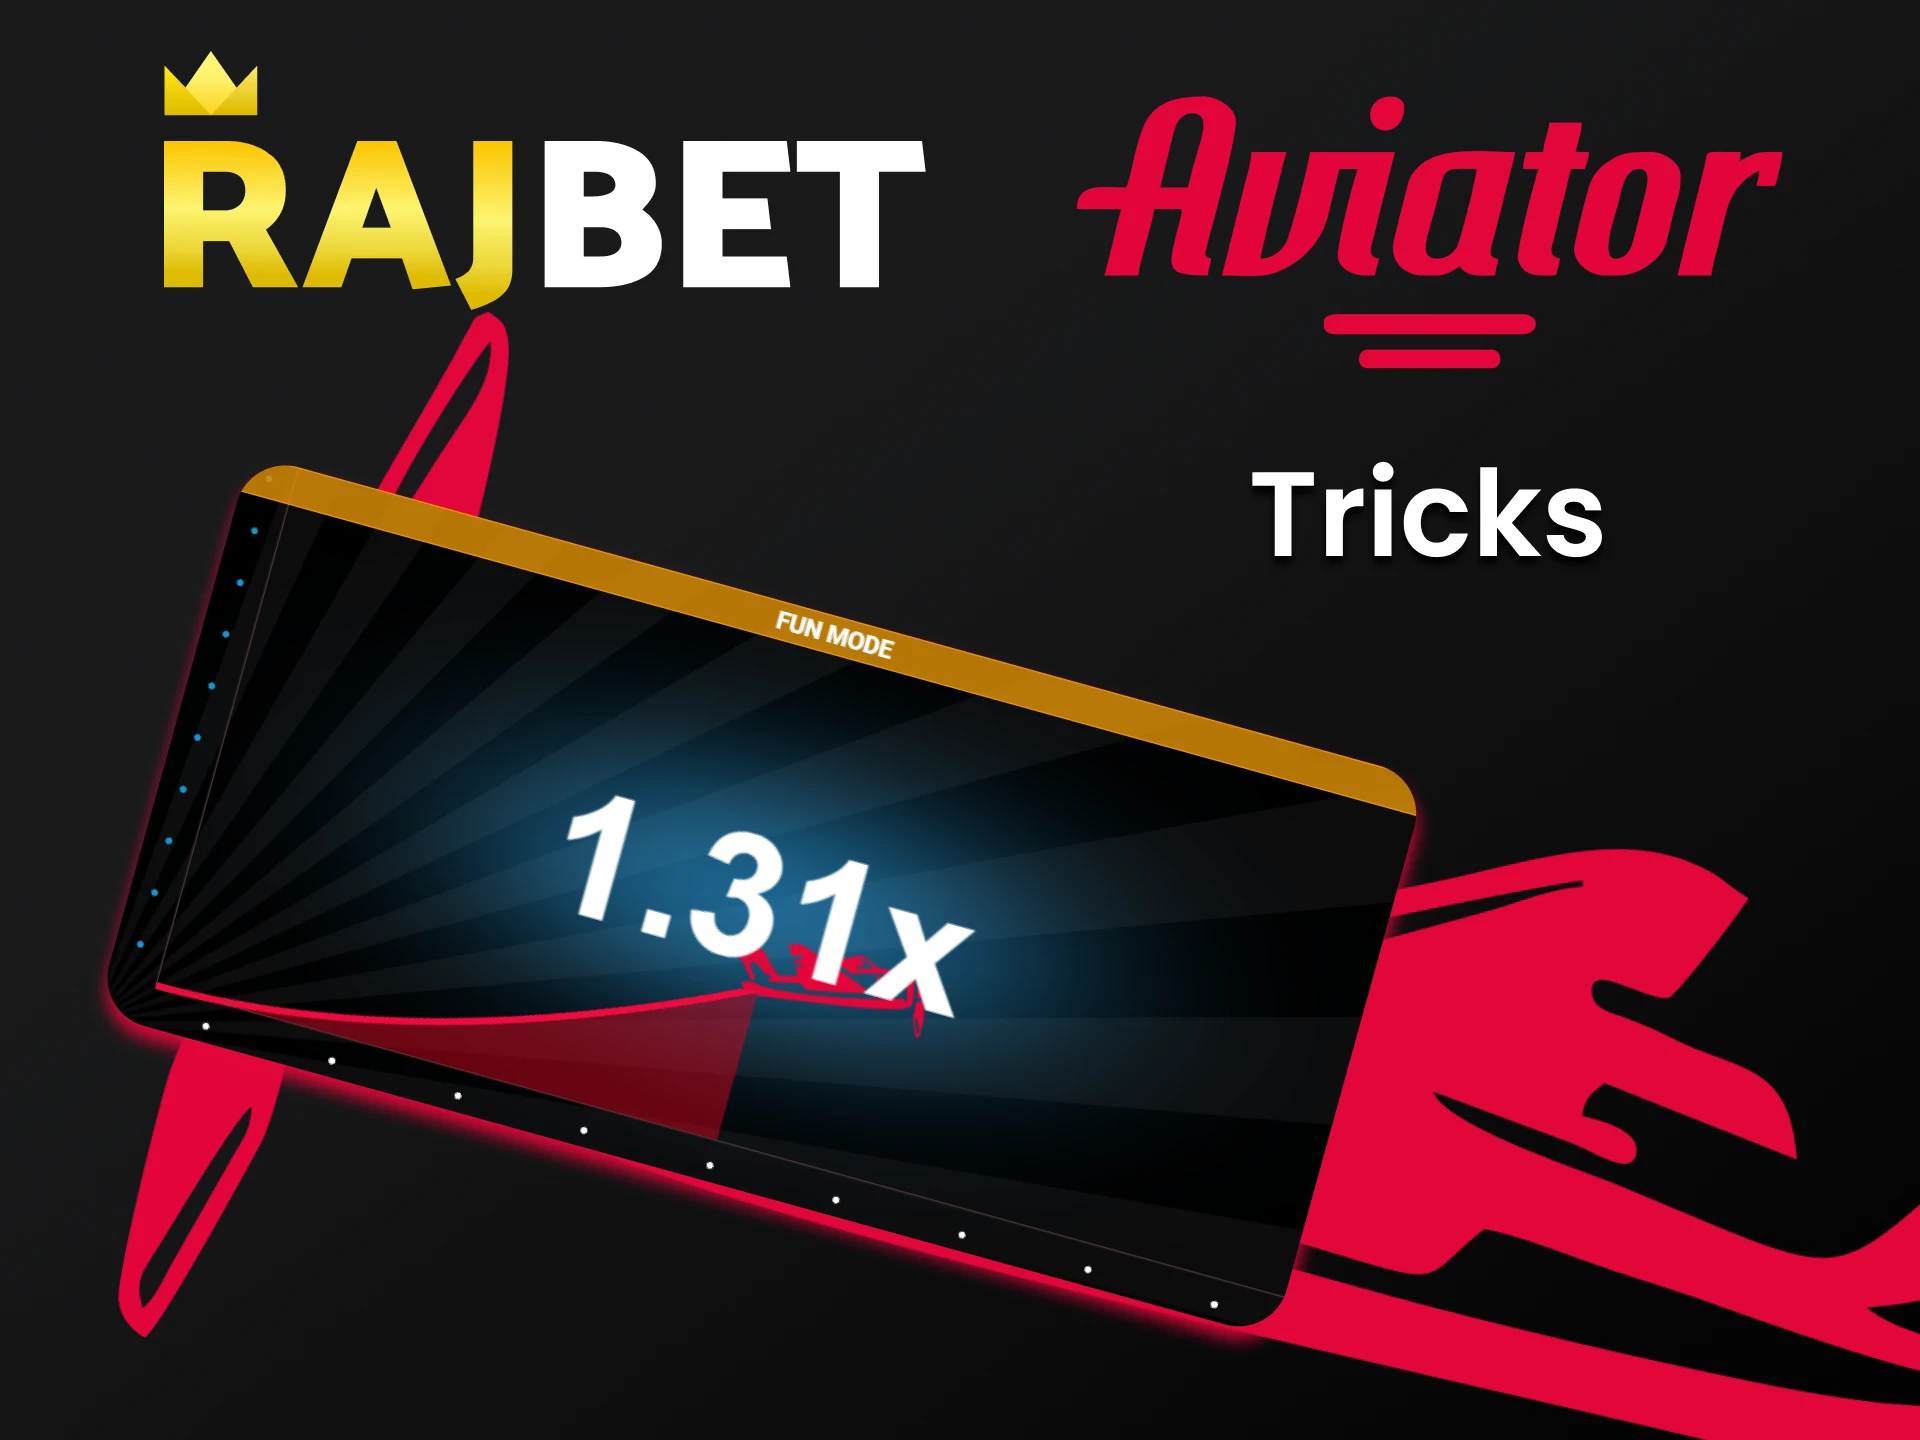 Use all the ways to win in Aviator at Rajbet.